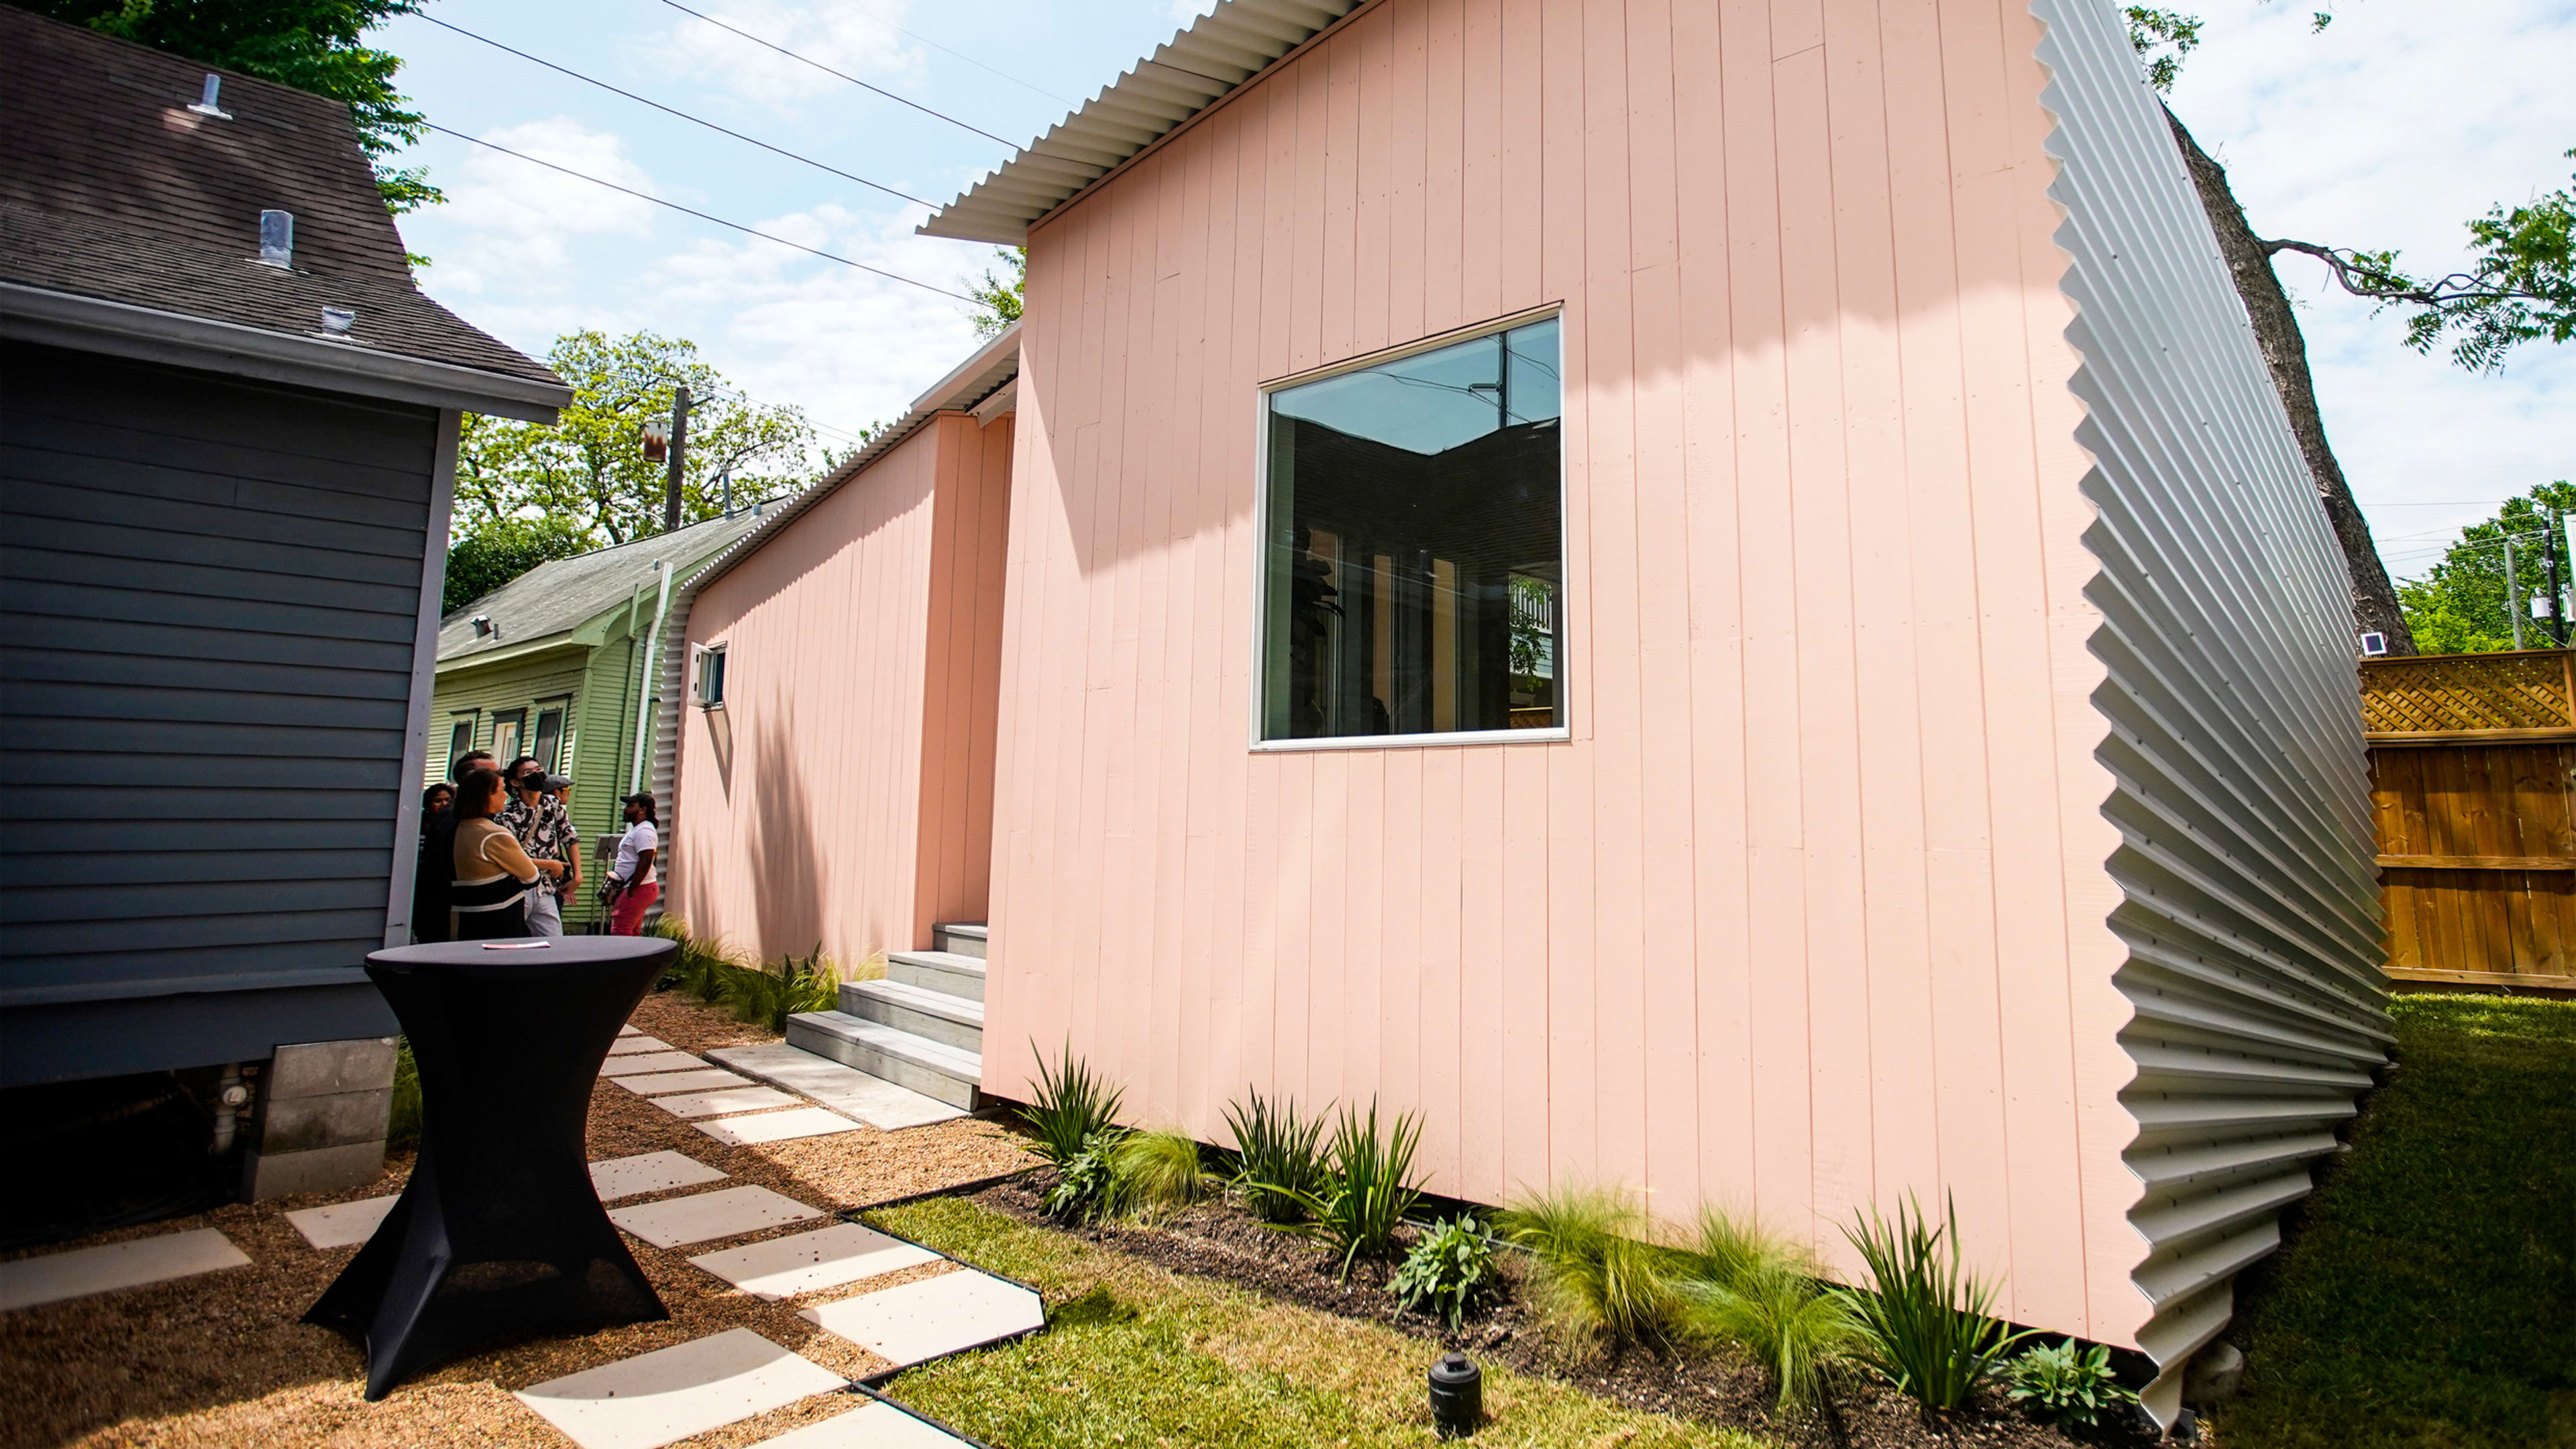 How backyard ‘granny flats’ could help solve the housing crisis